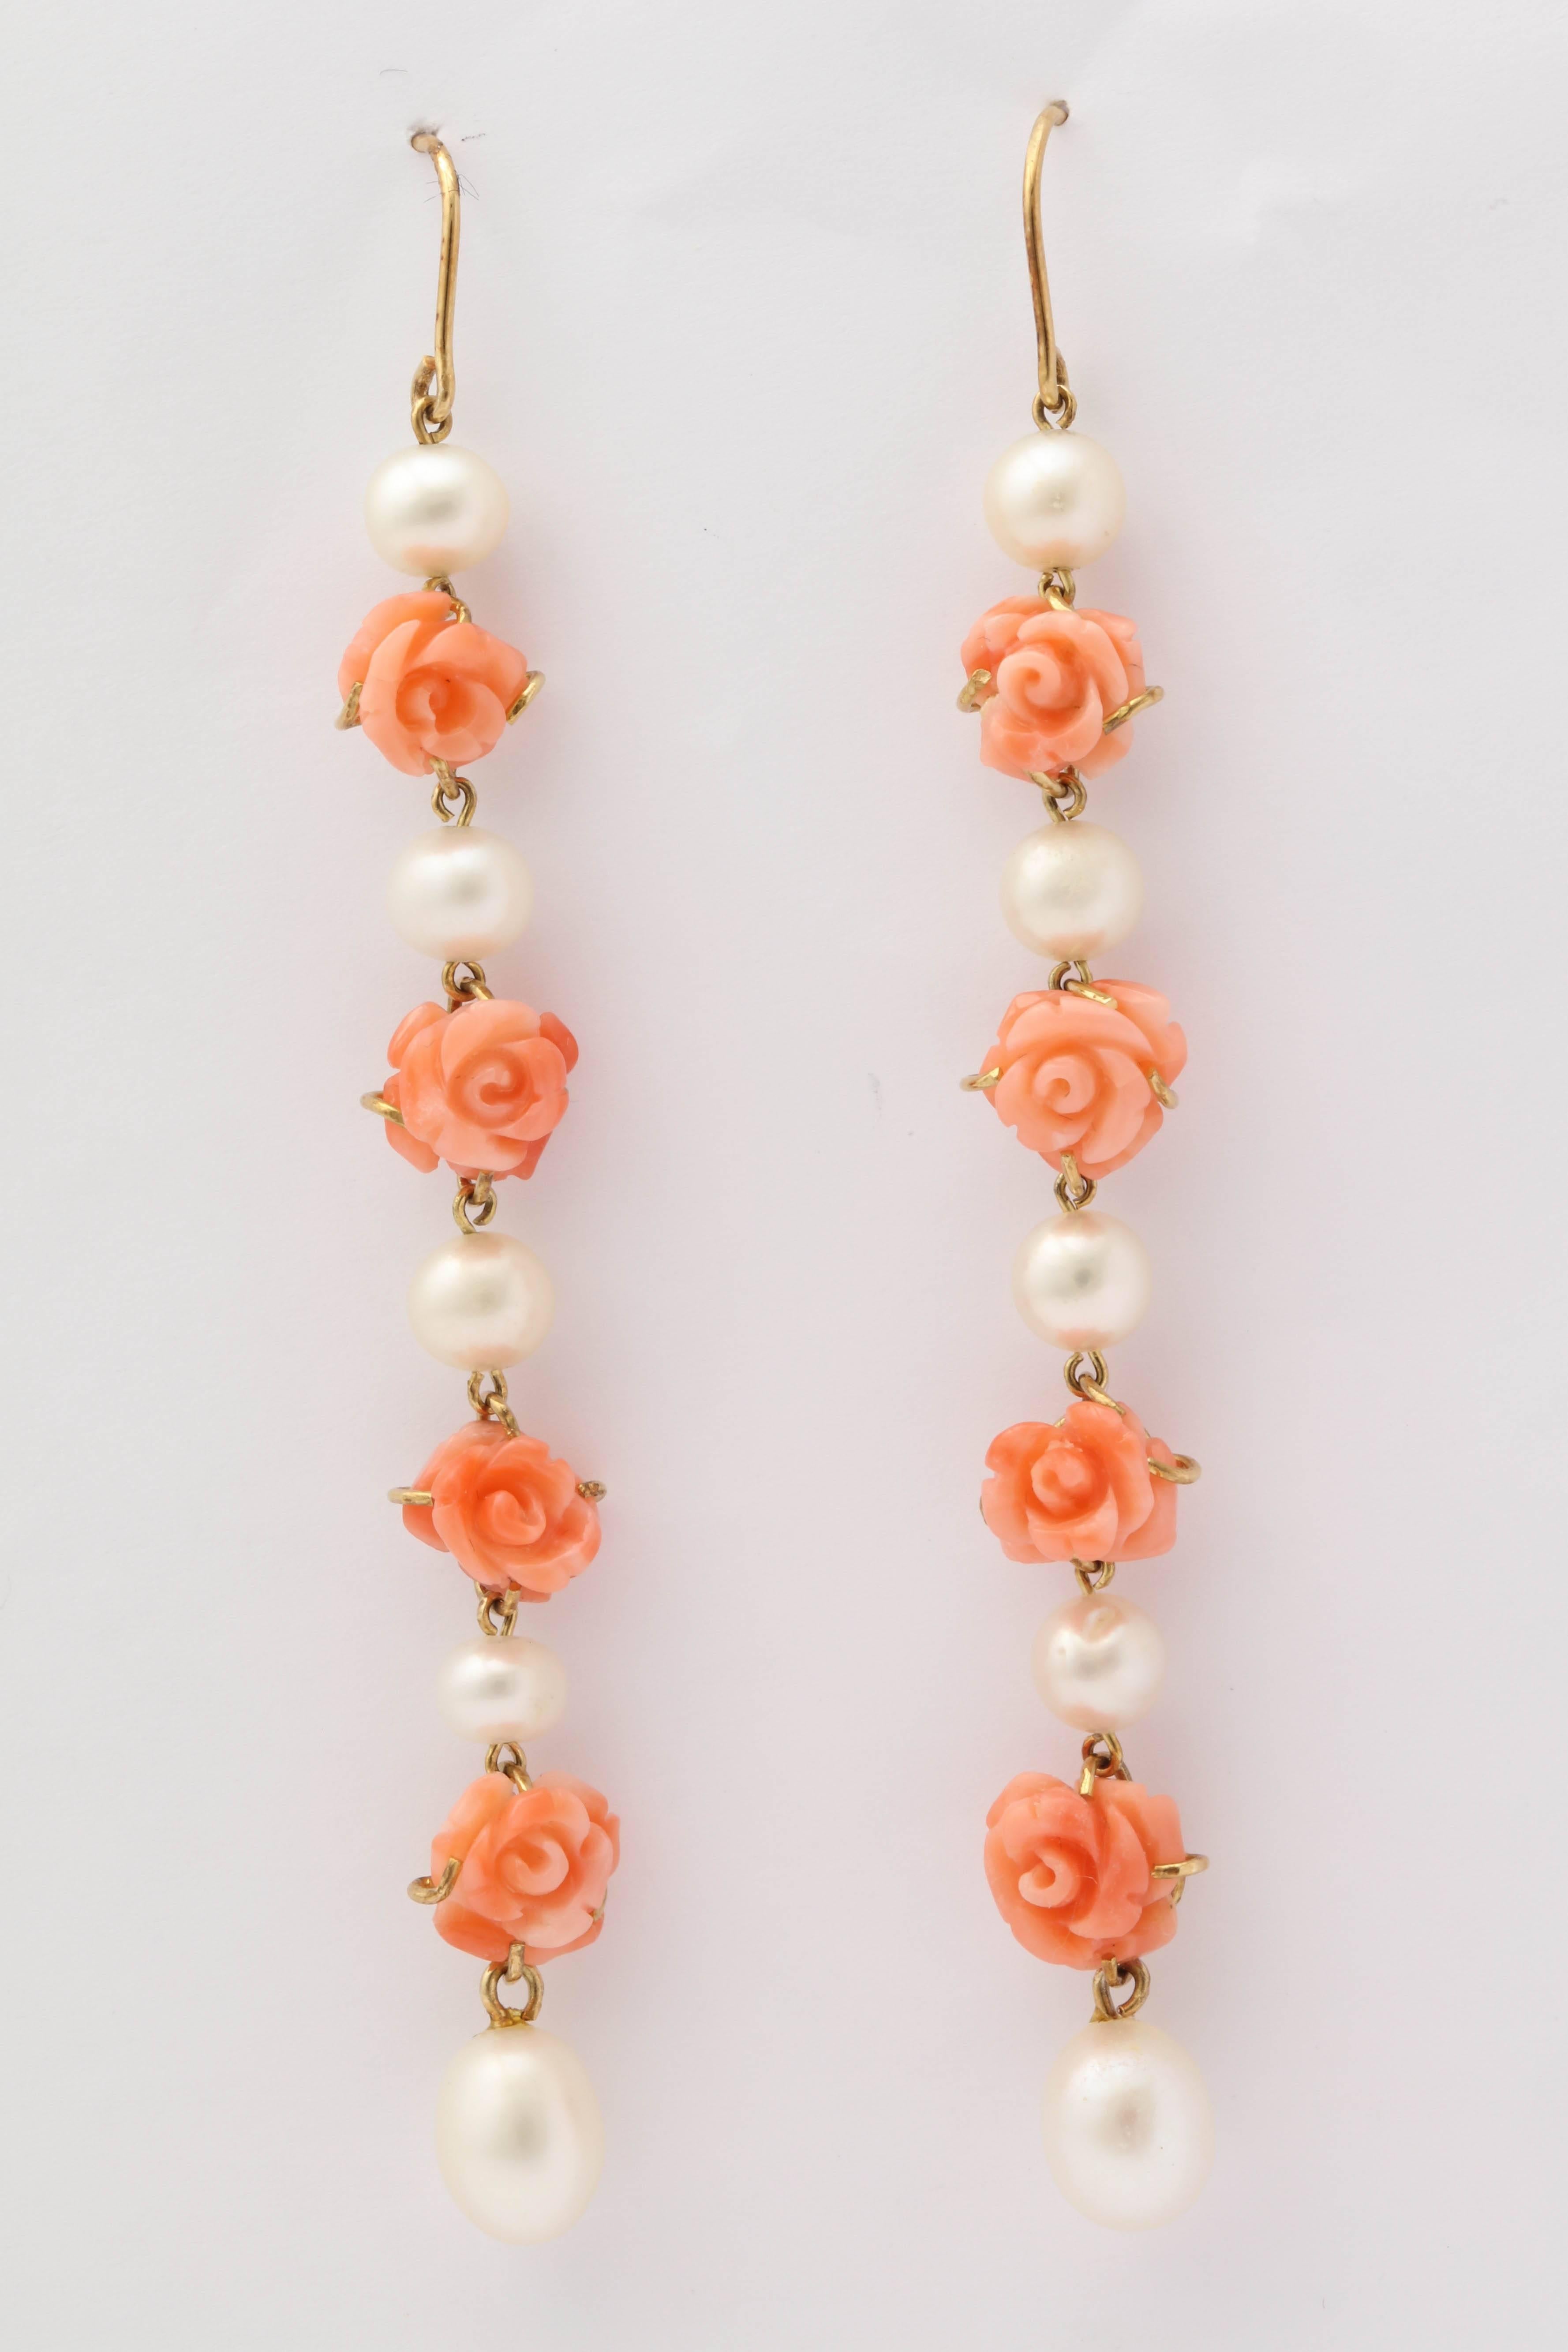 One Pair Of Ladies 18kt Gold Dangle Earrings Designed With Alternating Eight Carved Floral Coral Stones And Further Designed With 10 Cultured Pearls Measuring Approximately On Average 5Mm Each.Made In America In The 1950's.